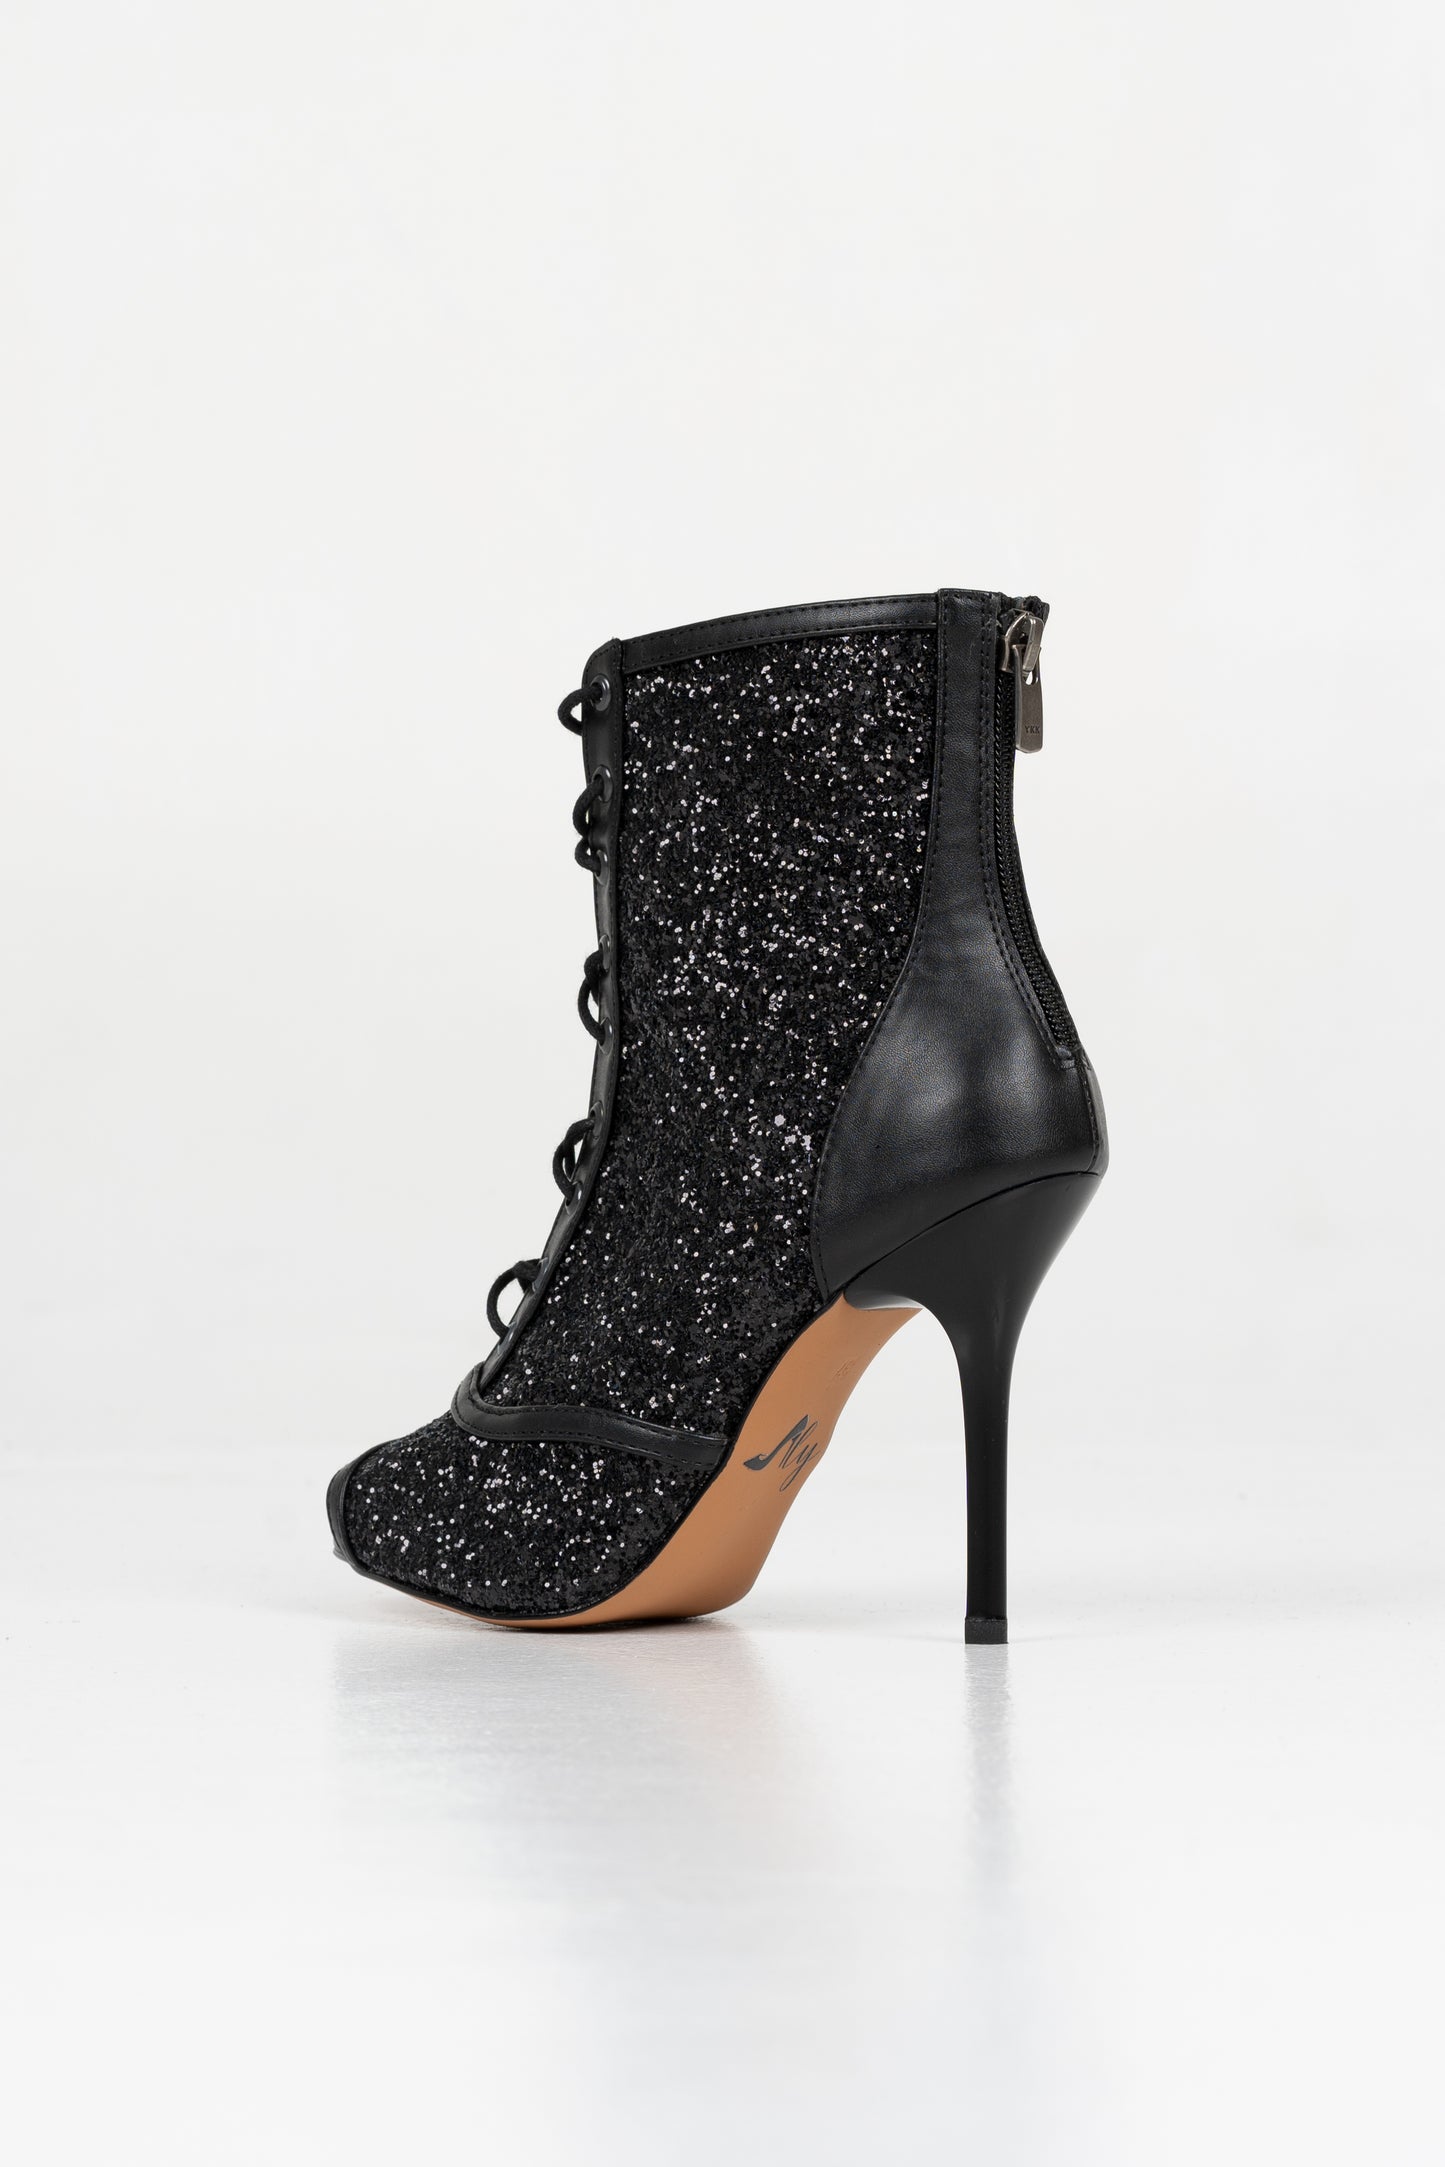 Sara - Glitter open toe lace up stiletto ankle boot